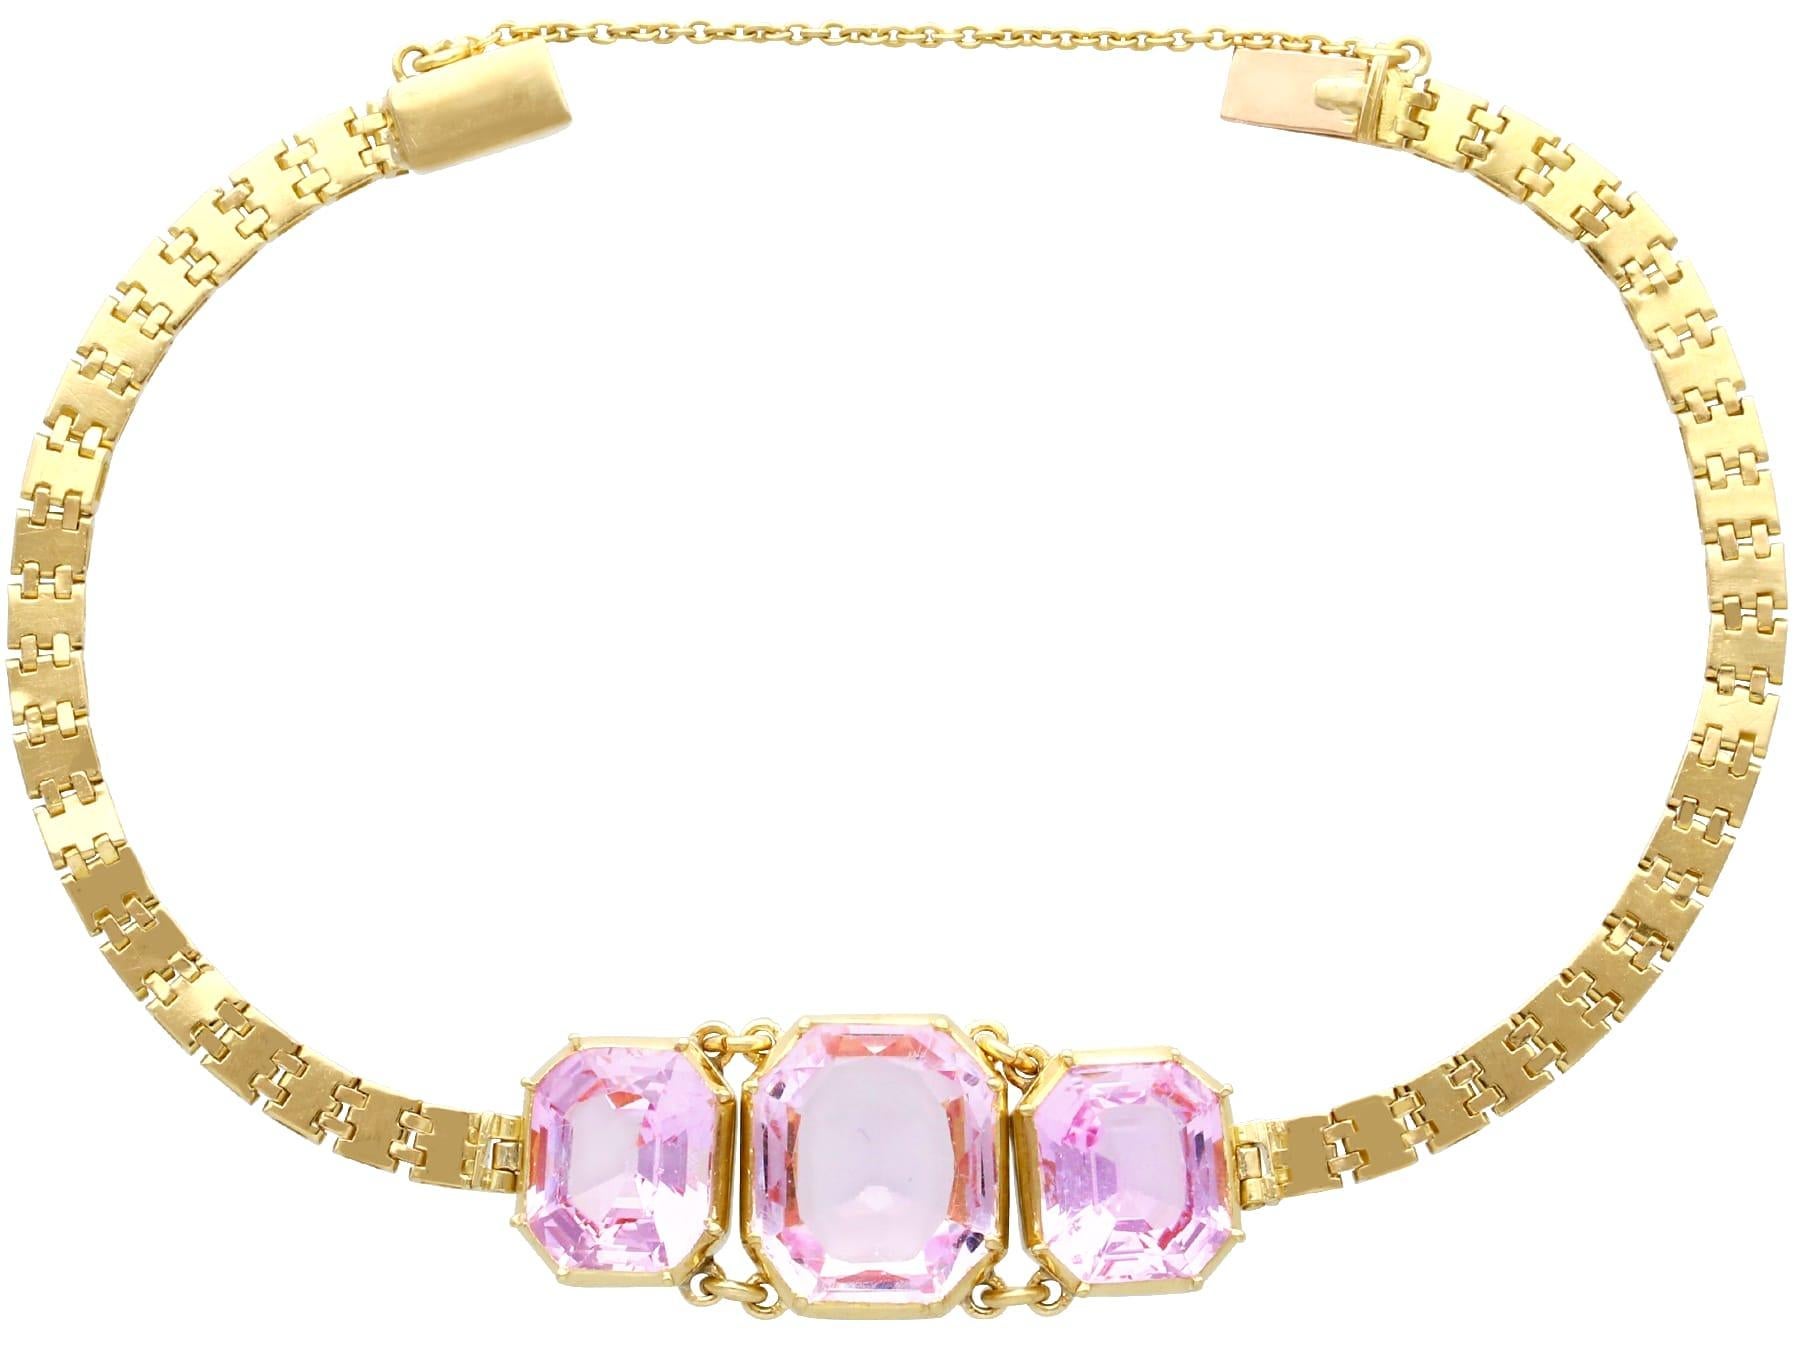 Antique 13.20Ct Pink Topaz and 18k Yellow Gold Bracelet Circa 1840 For Sale 1